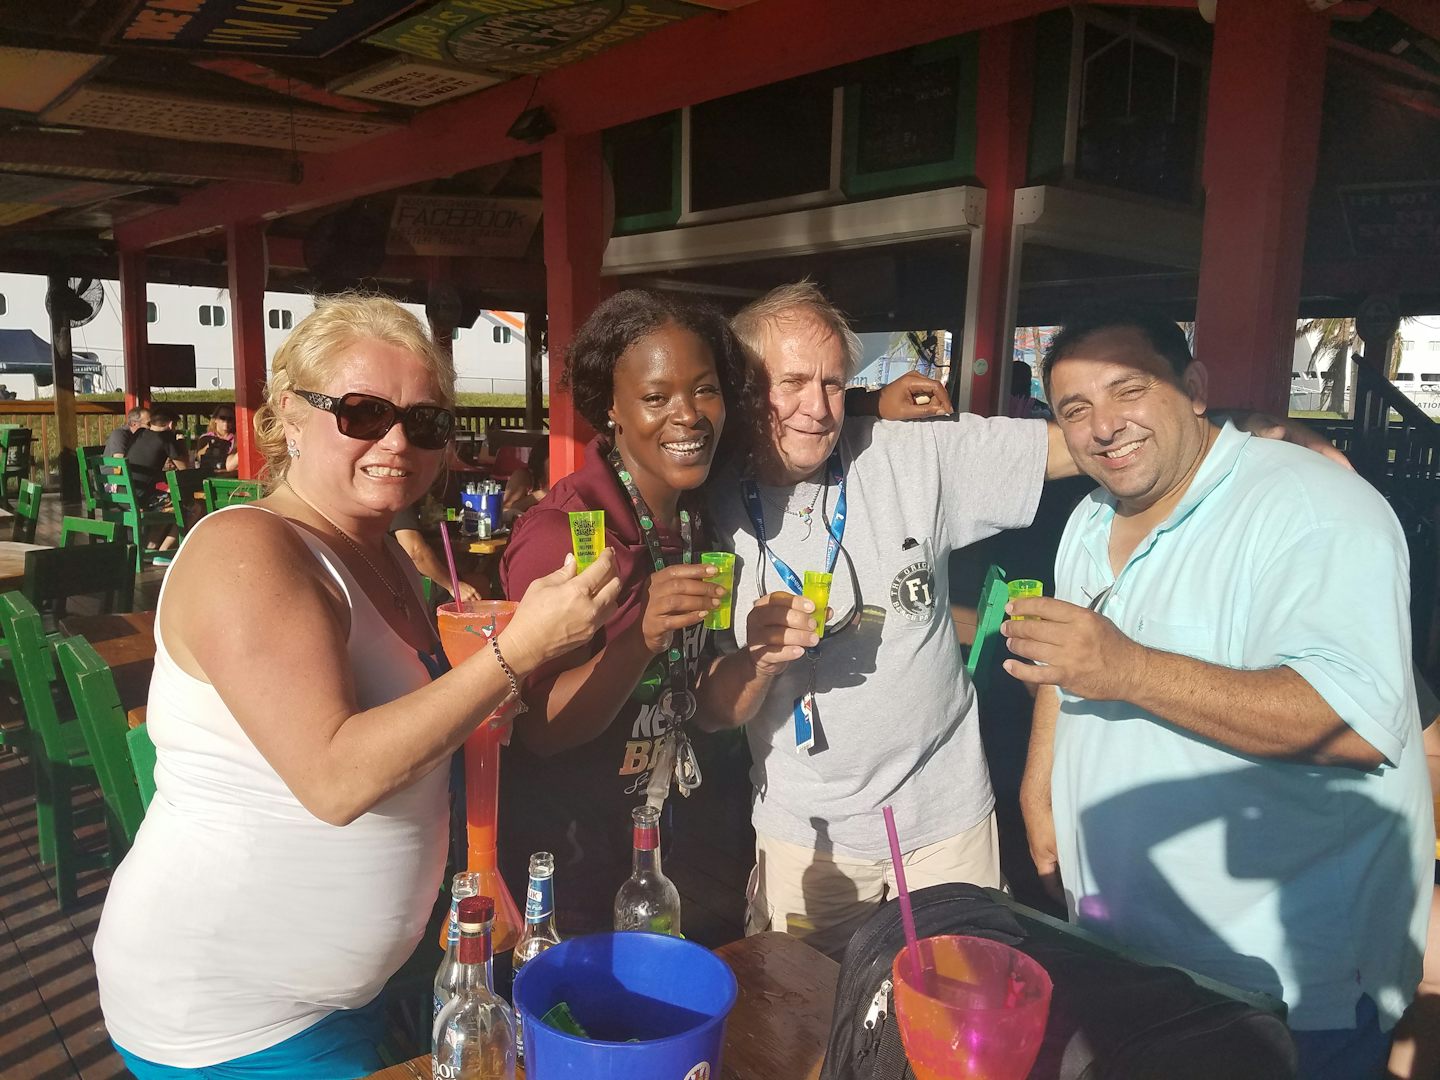 Fun. Food. Best drinks great times..best restaurant and party place if even for an hour before u board the ship after your Excursions..or u can just go here. Reading all their fun signs  dancing. Eating. Drinking. Fun for all ages senor frogs and fat tues. Freeport and nassau bahamas